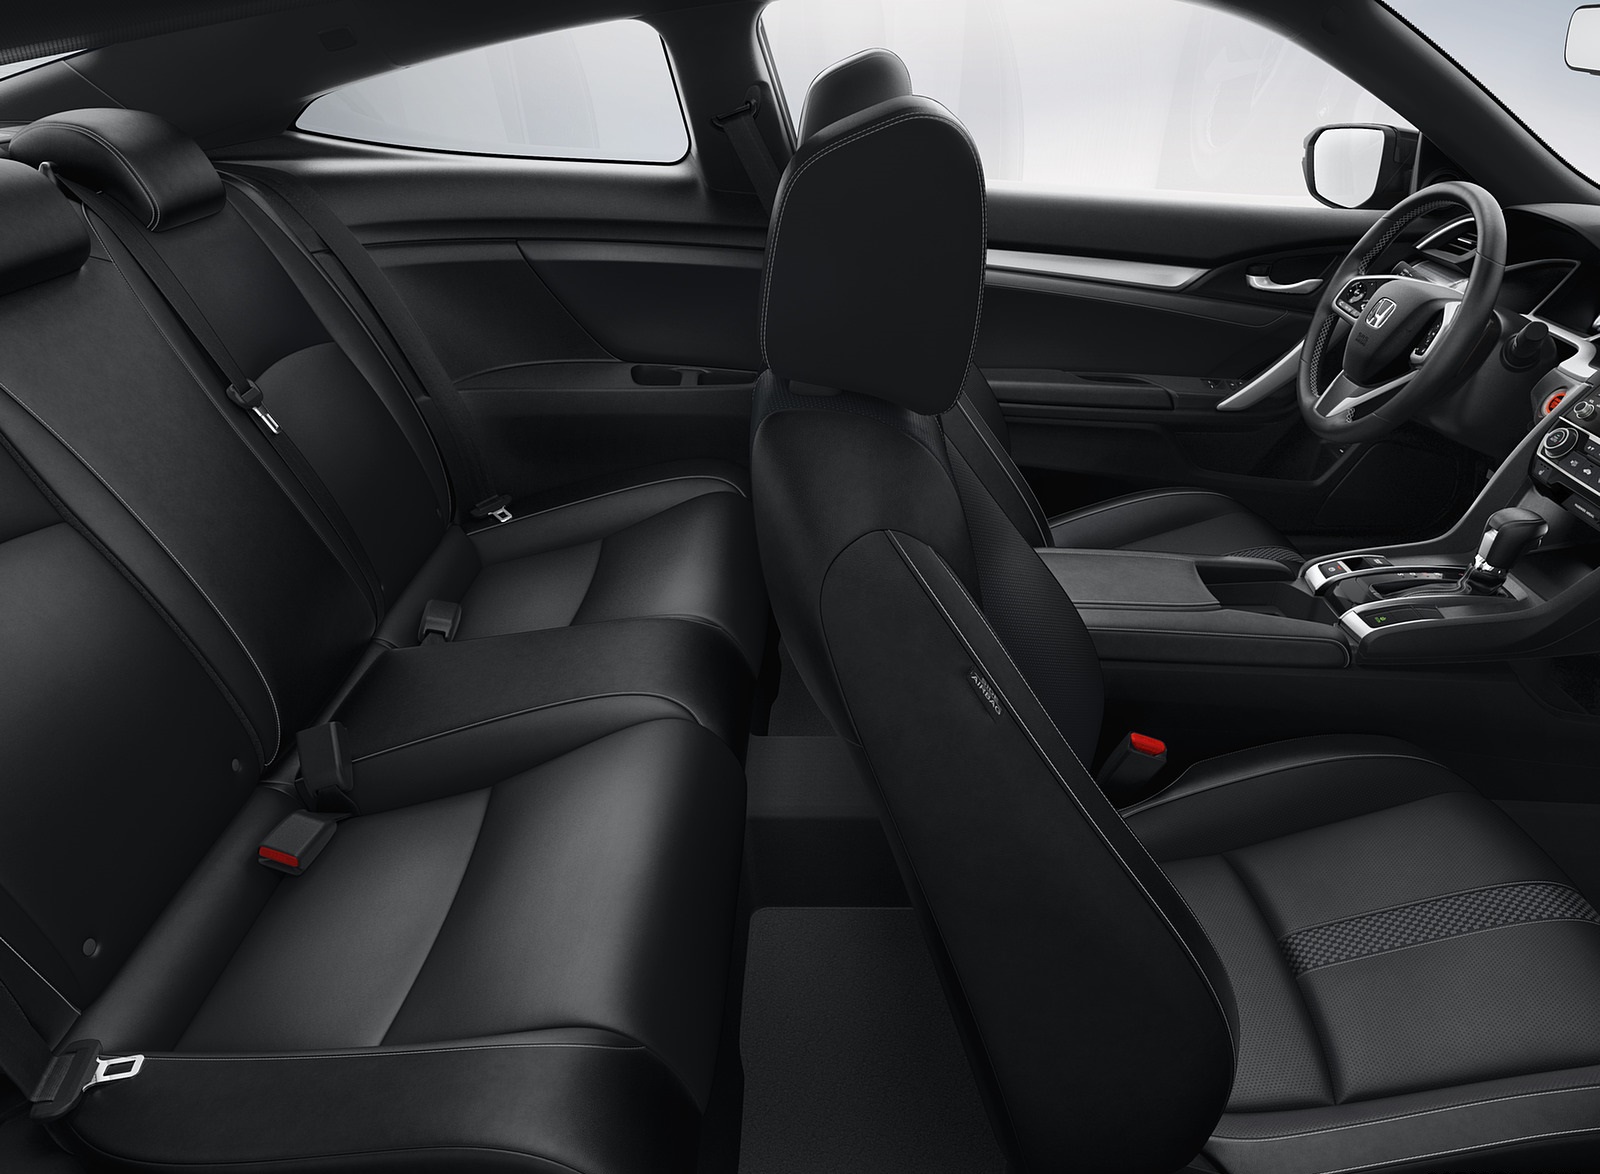 2019 Honda Civic Coupe Interior Seats Wallpapers #11 of 11